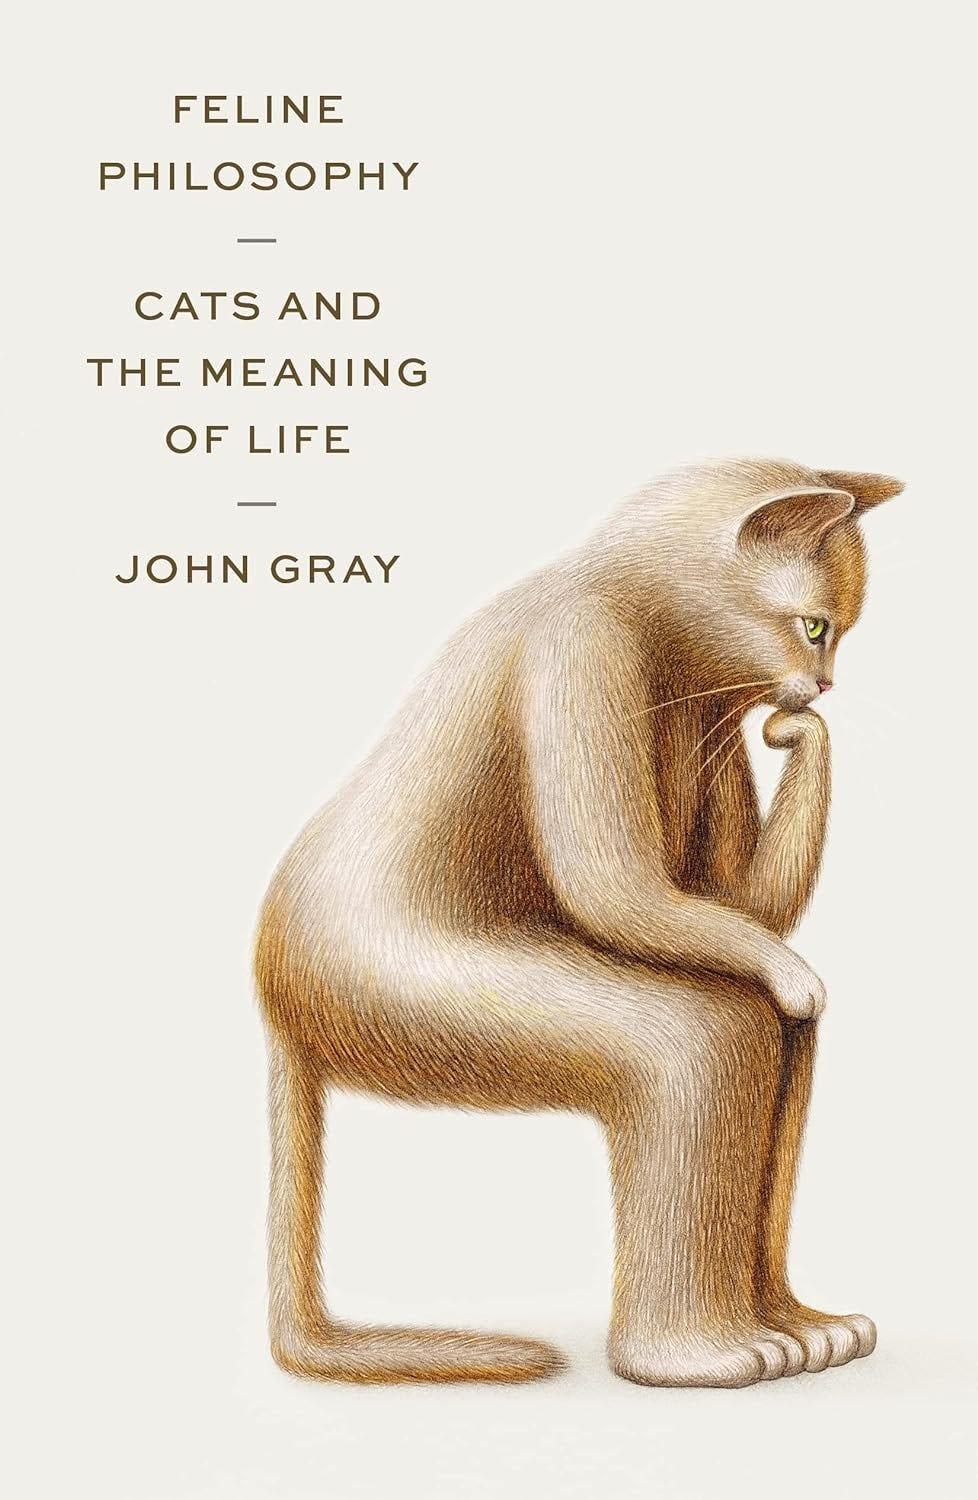 A thinking feline of book cover, by John Gray